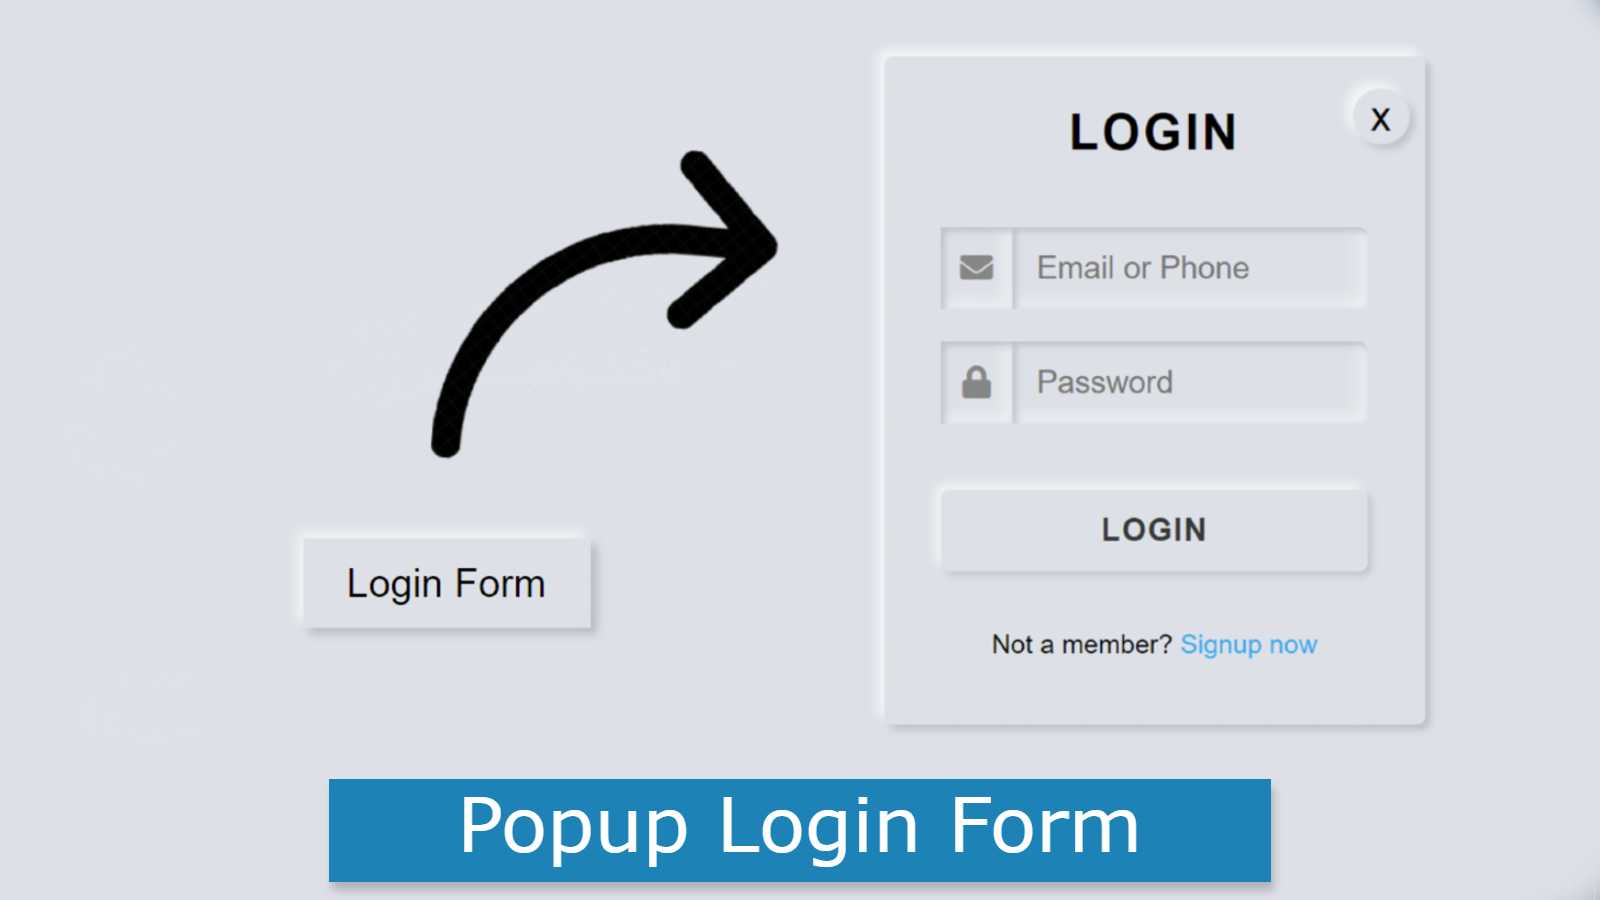 Popup css. Попап CSS. Popup html. Popup form. Login form html.